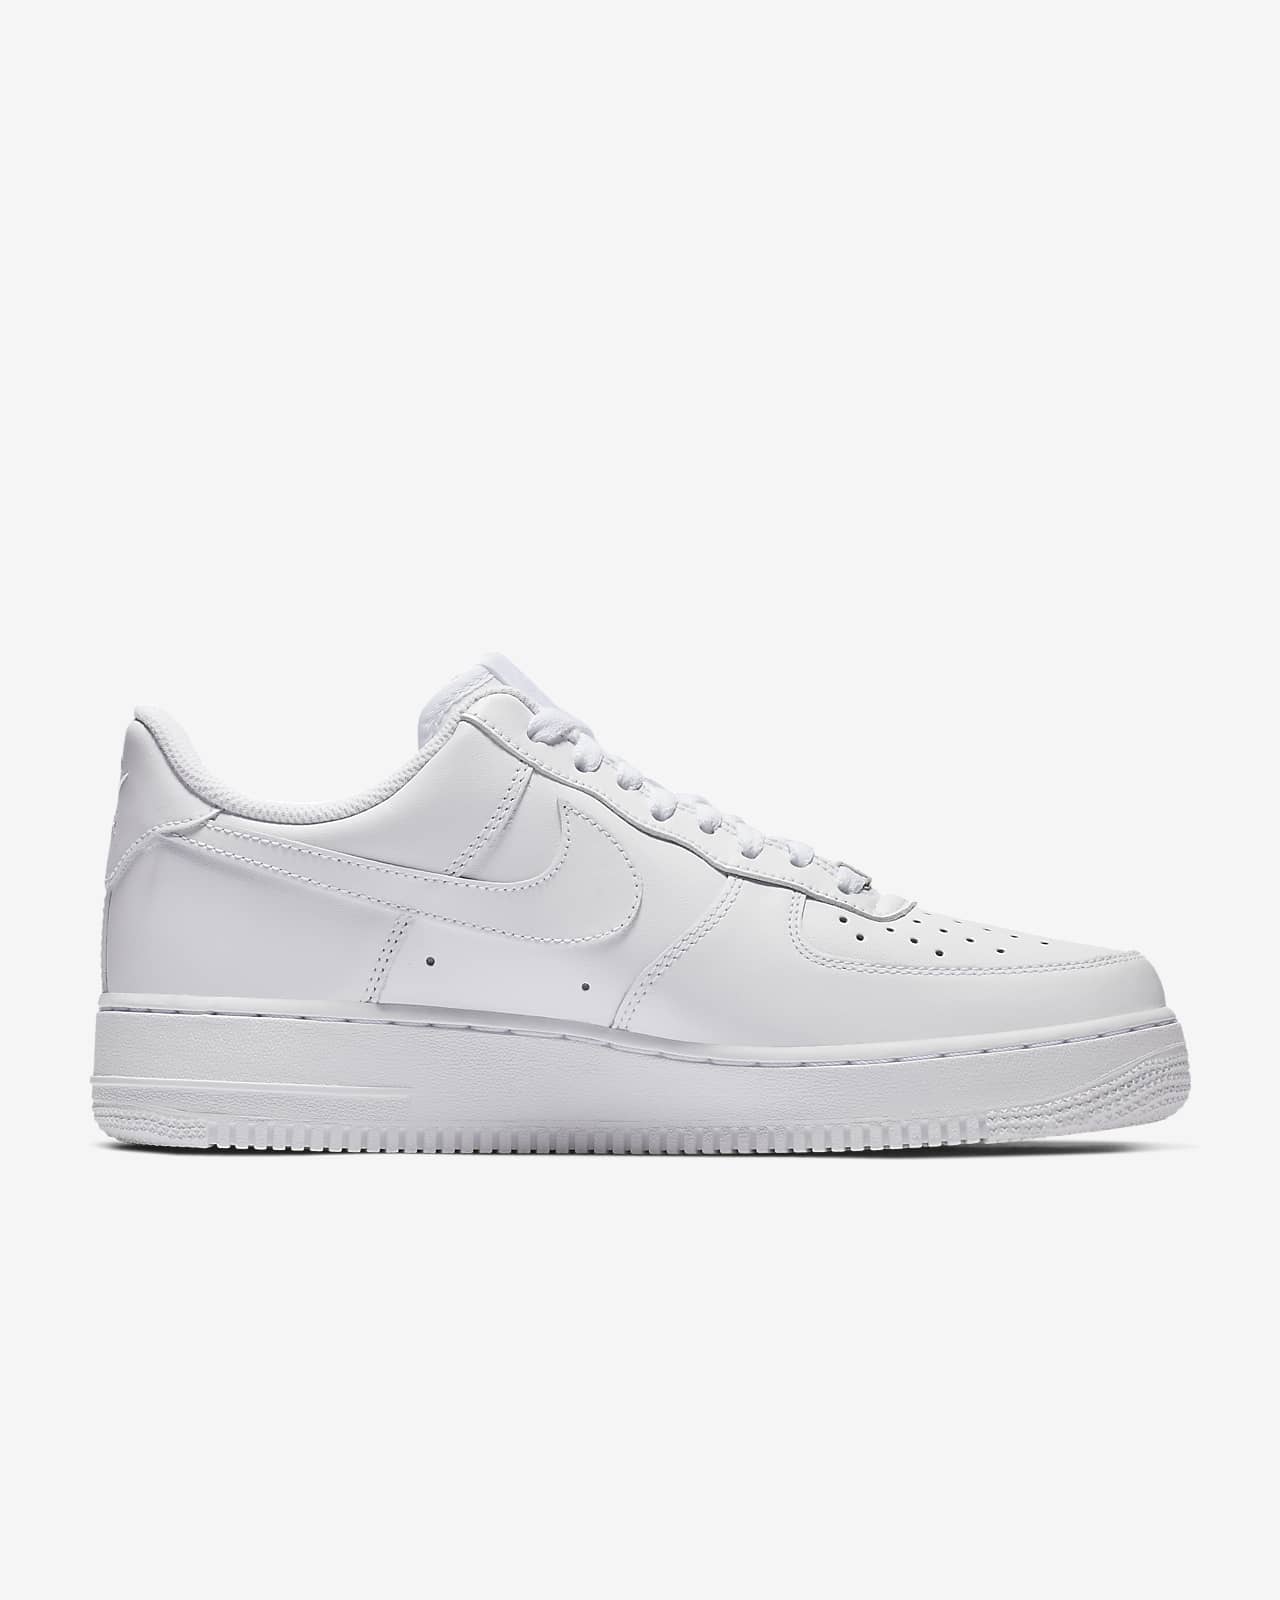 nike air force 1 07 womens size 7